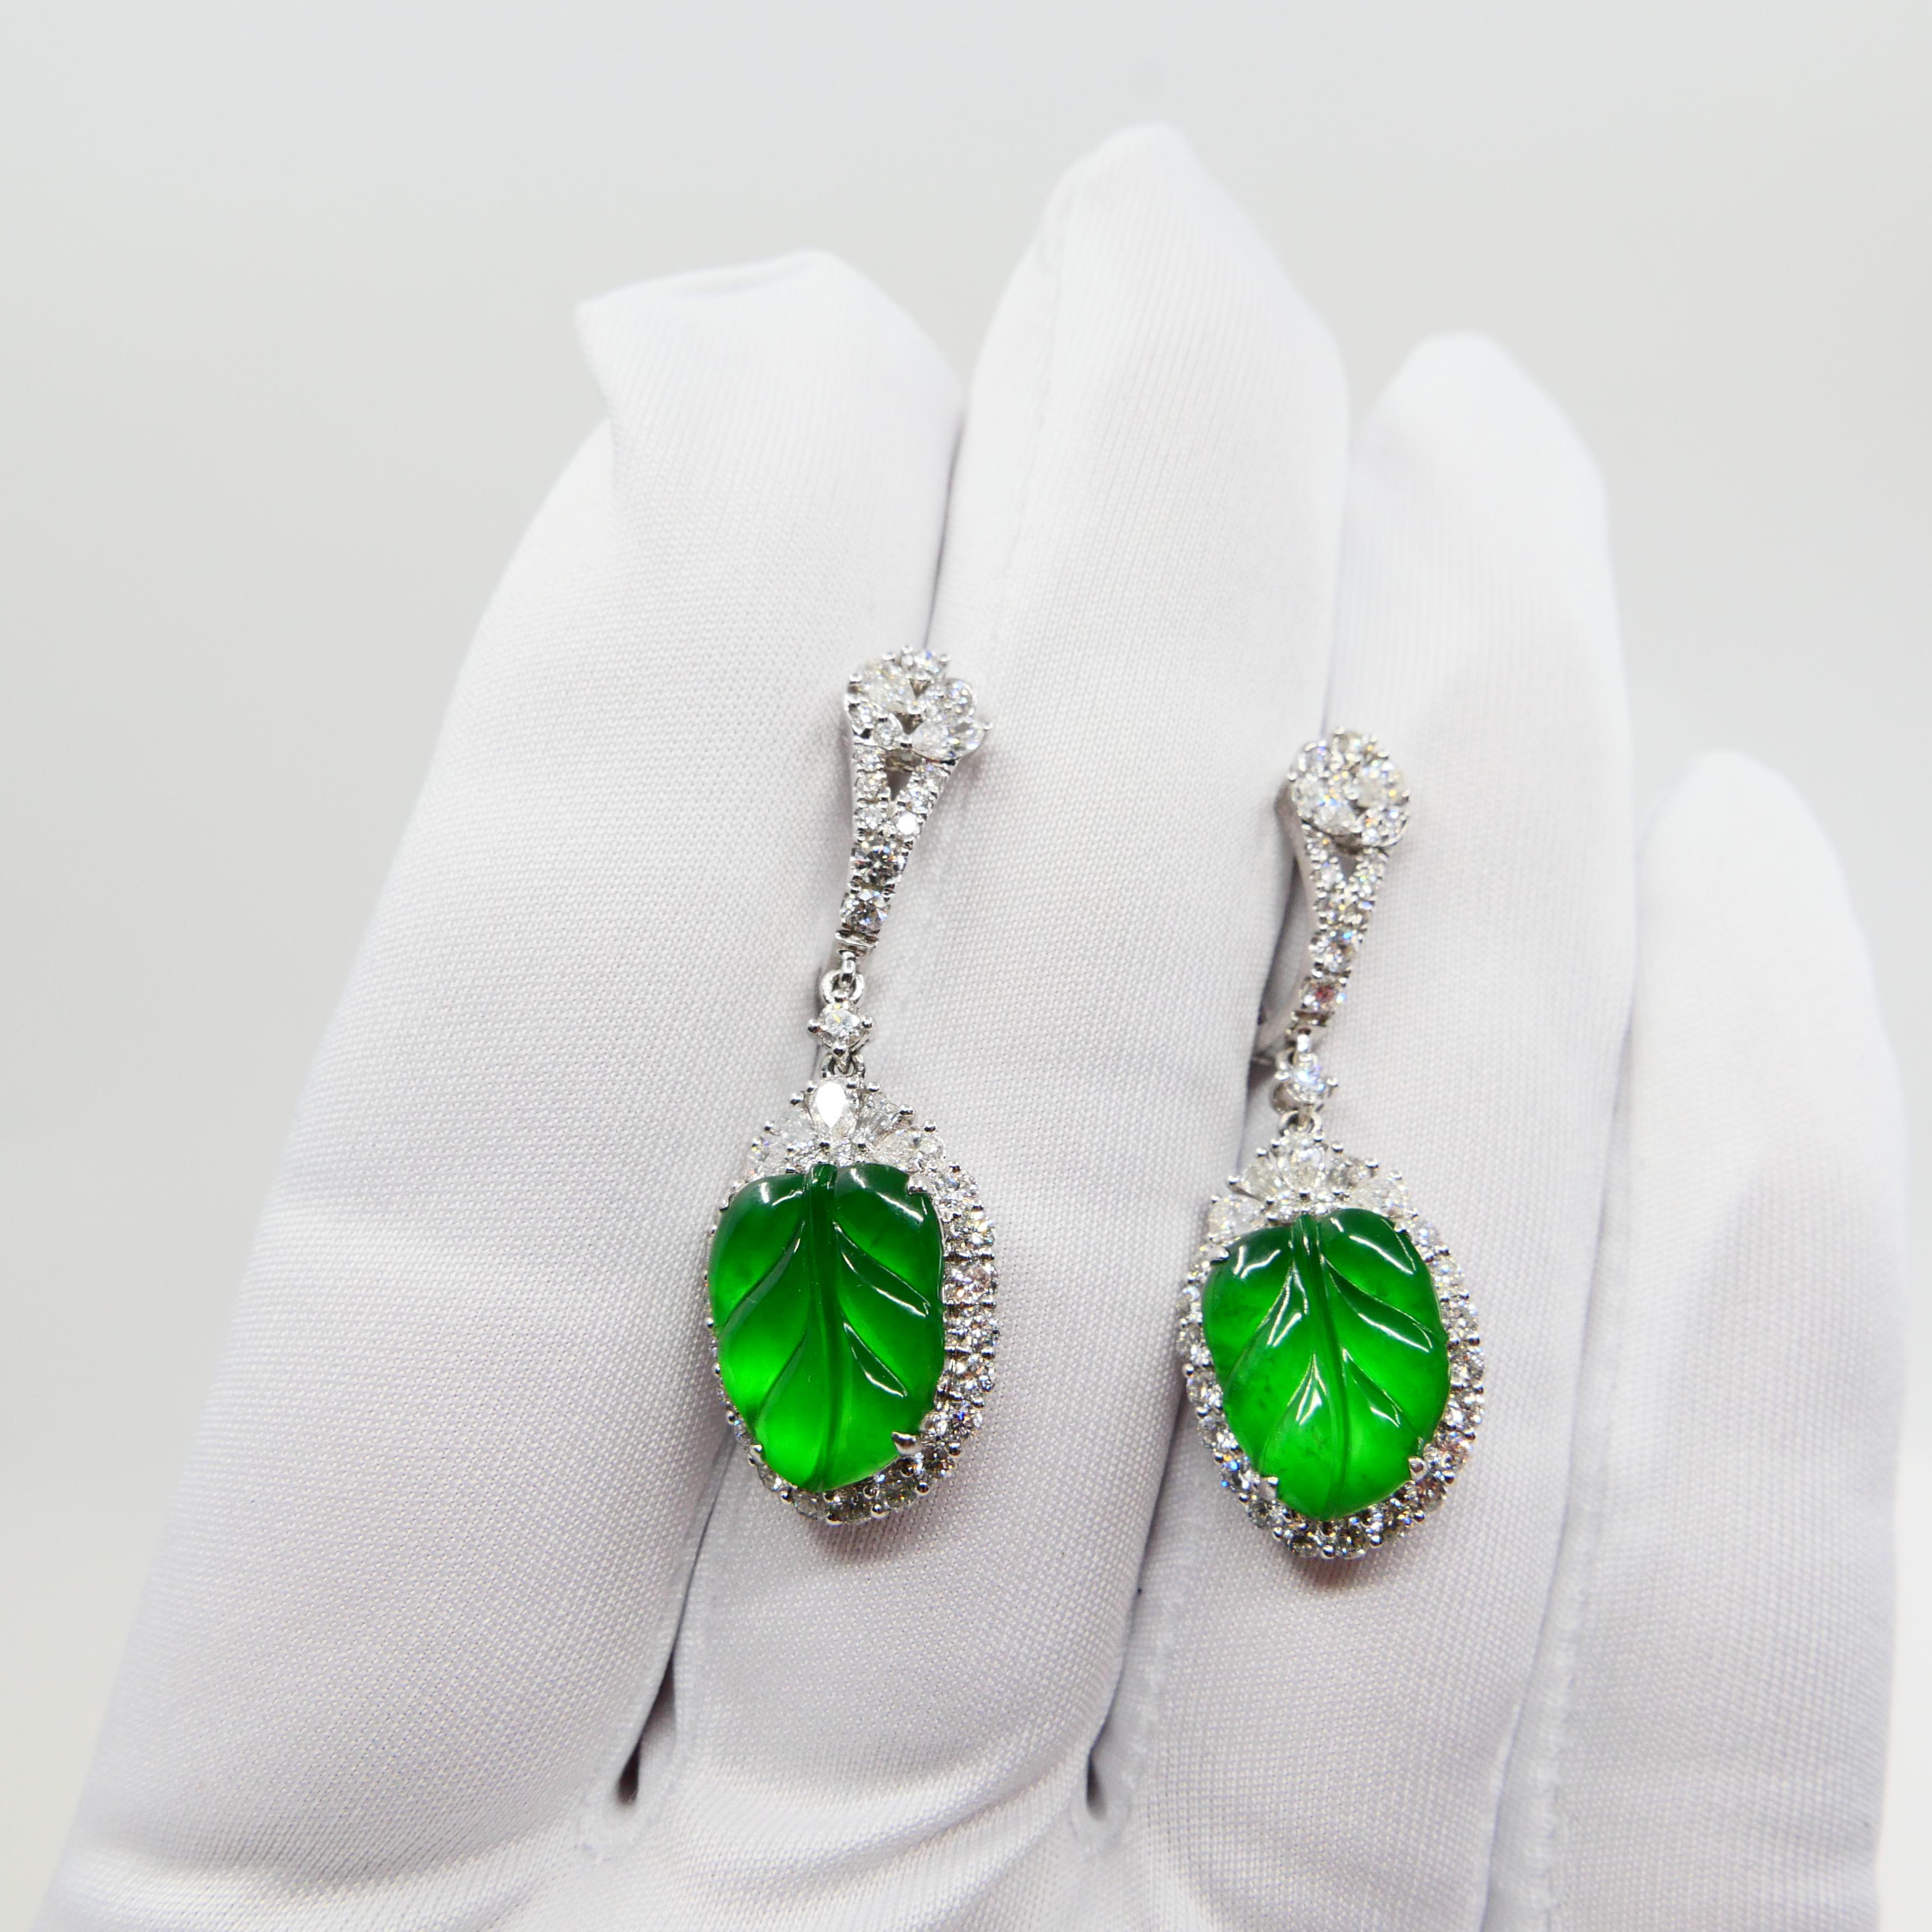 Certified Icy Apple Green Jade and Diamond Earrings, Almost Imperial Green 9